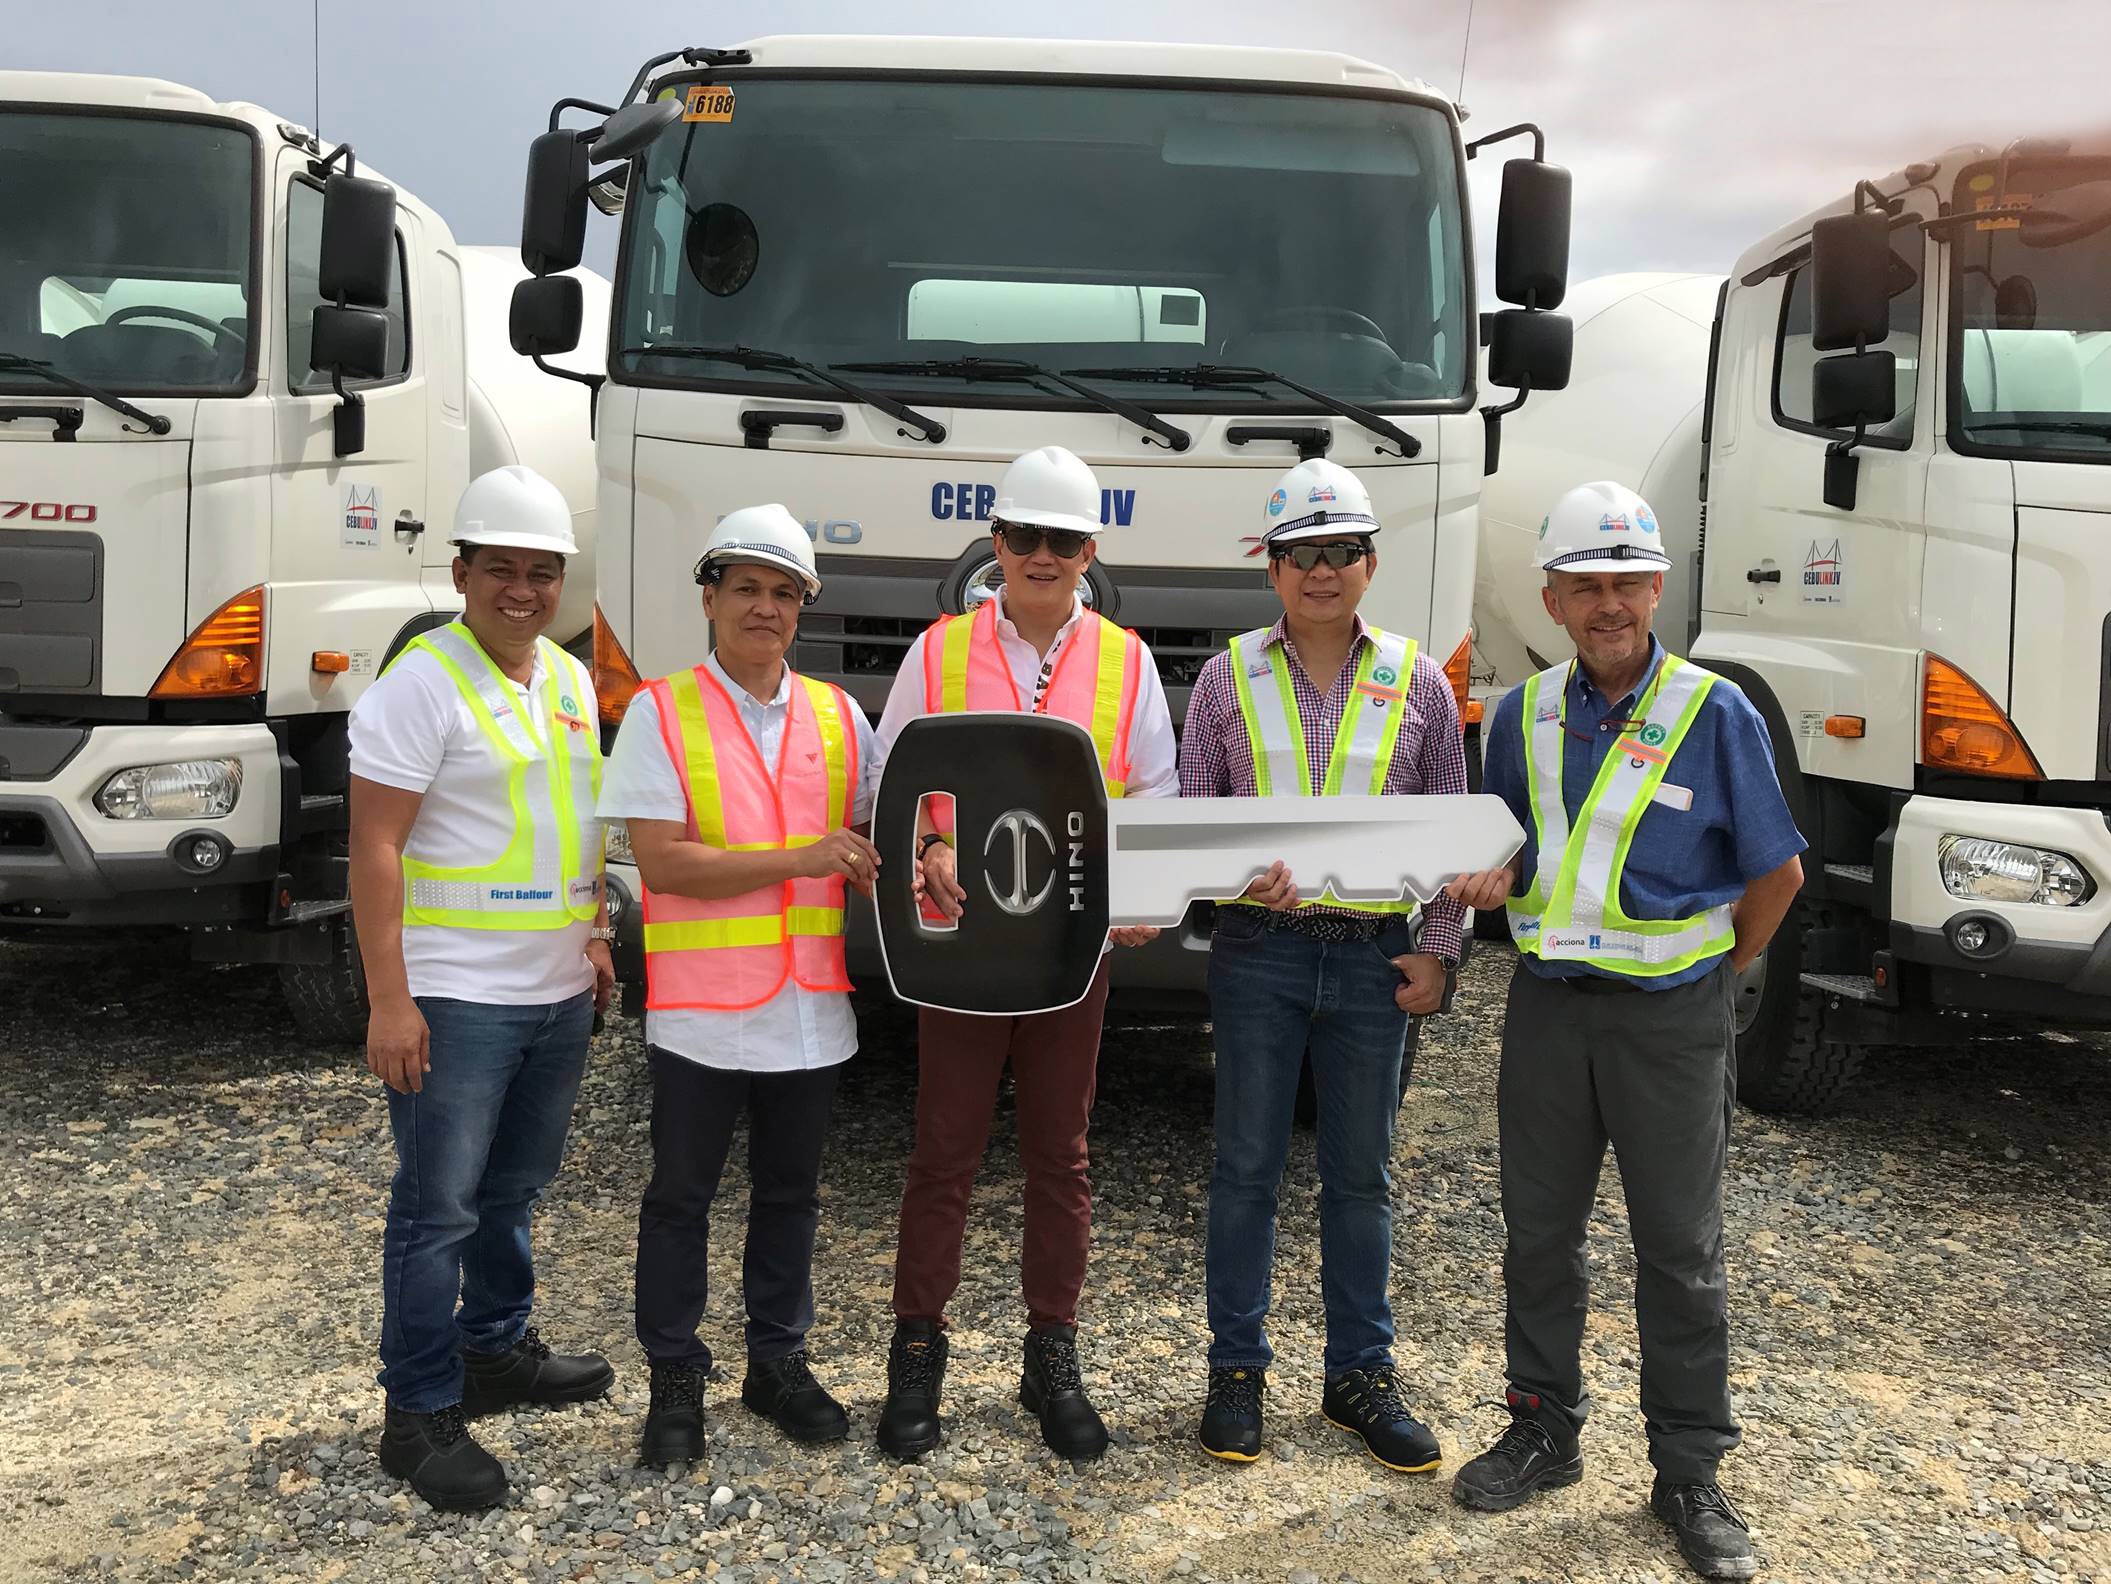 The Hino truck turnover ceremony to Cebu Link Joint Venture was attended by: (L-R) Hino Cebu Business Unit Manager Danilo S. Heramis, HMP AVP-Gen. Sales, Oliver Dela Cruz, Hino Cebu President & COO, Franklin Ong and Cebu Link Joint Venture executives – Equipment Manager Angel Pola and Procurement Department Manager Emmanuel M. Castro.